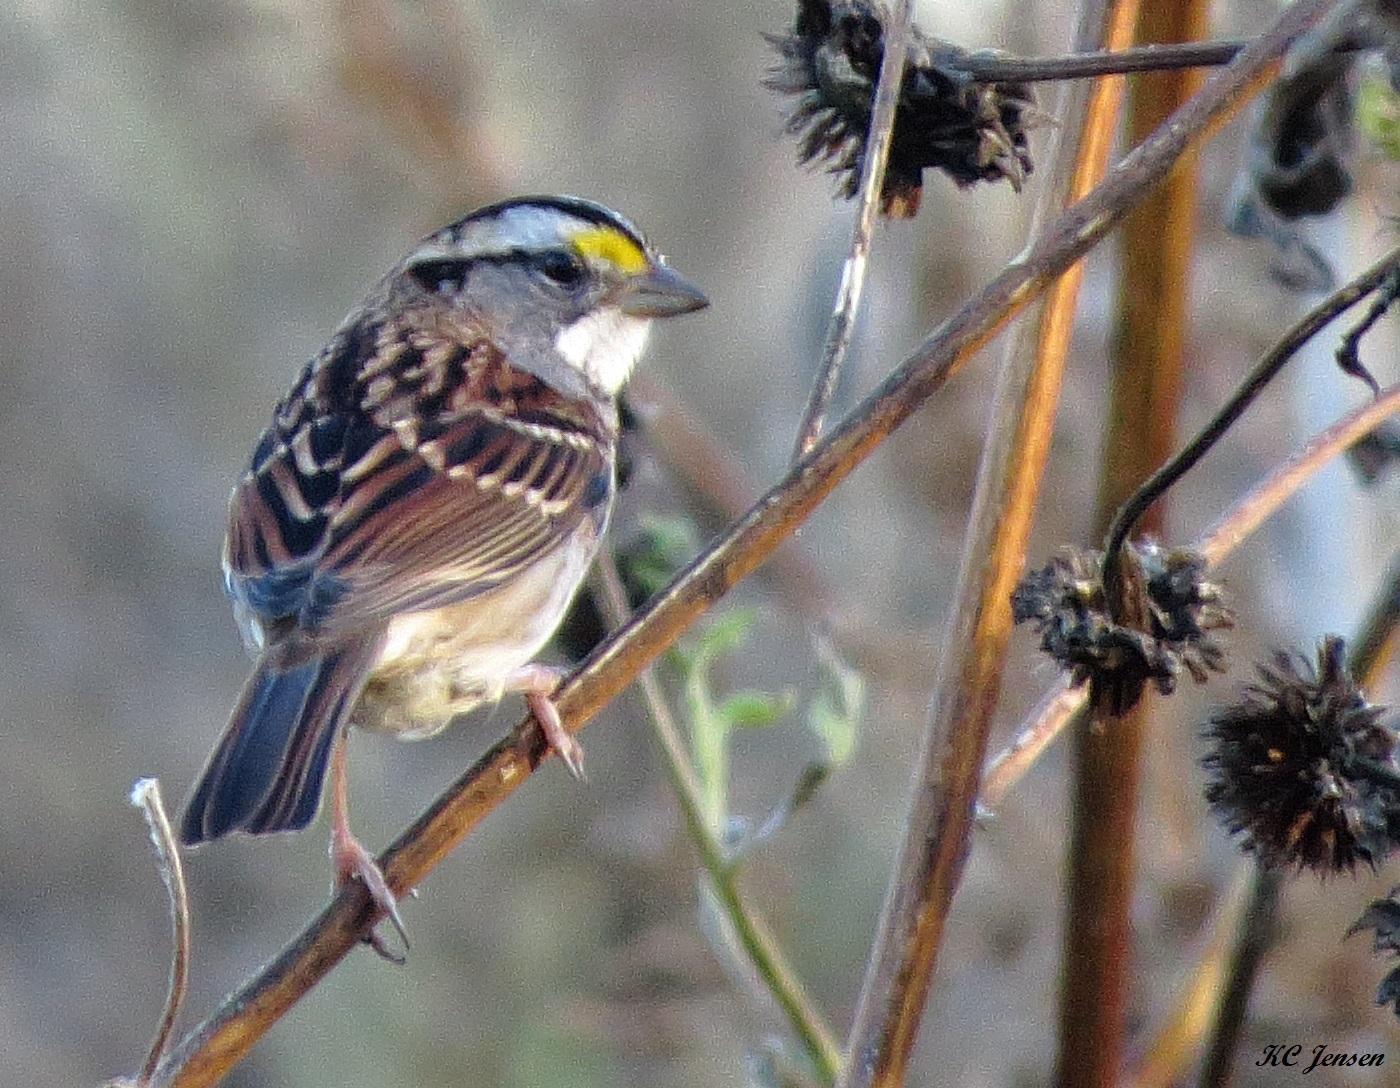 White-throated Sparrow Photo by Kent Jensen